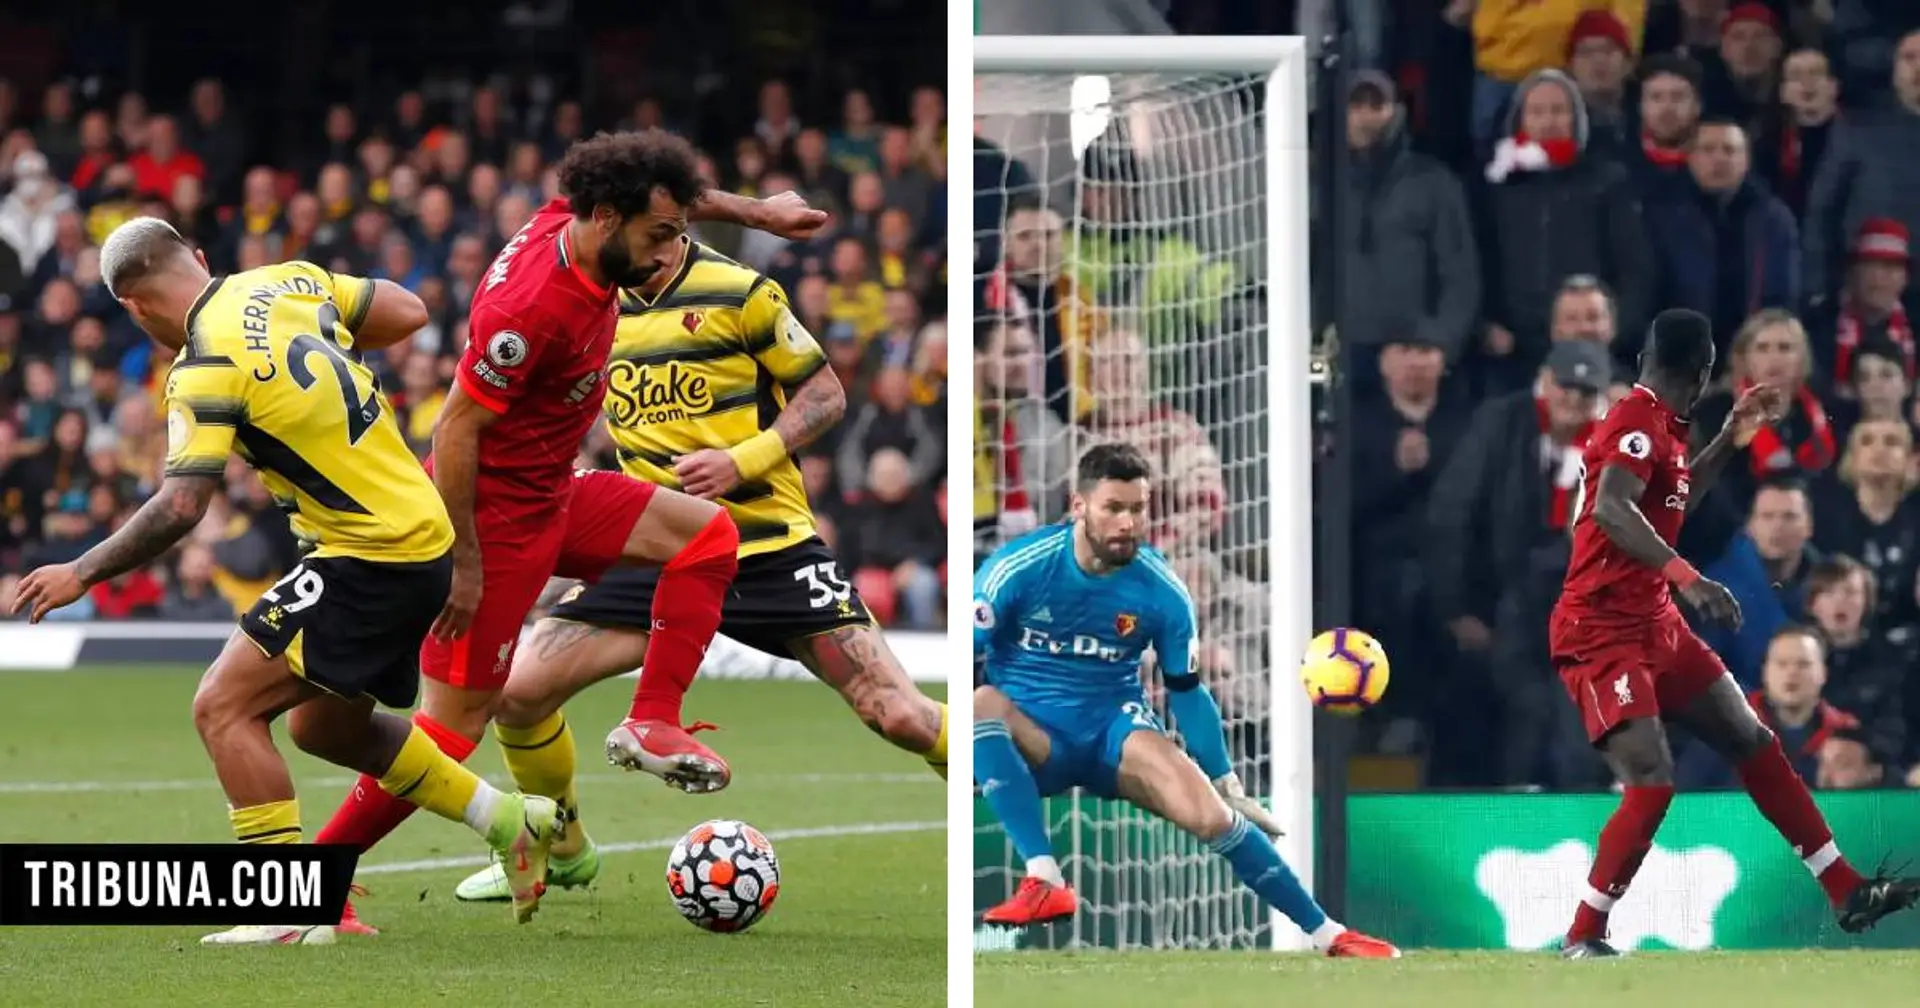 Get hyped for Watford match by watching 5 of the best goals Liverpool scored against them (video)